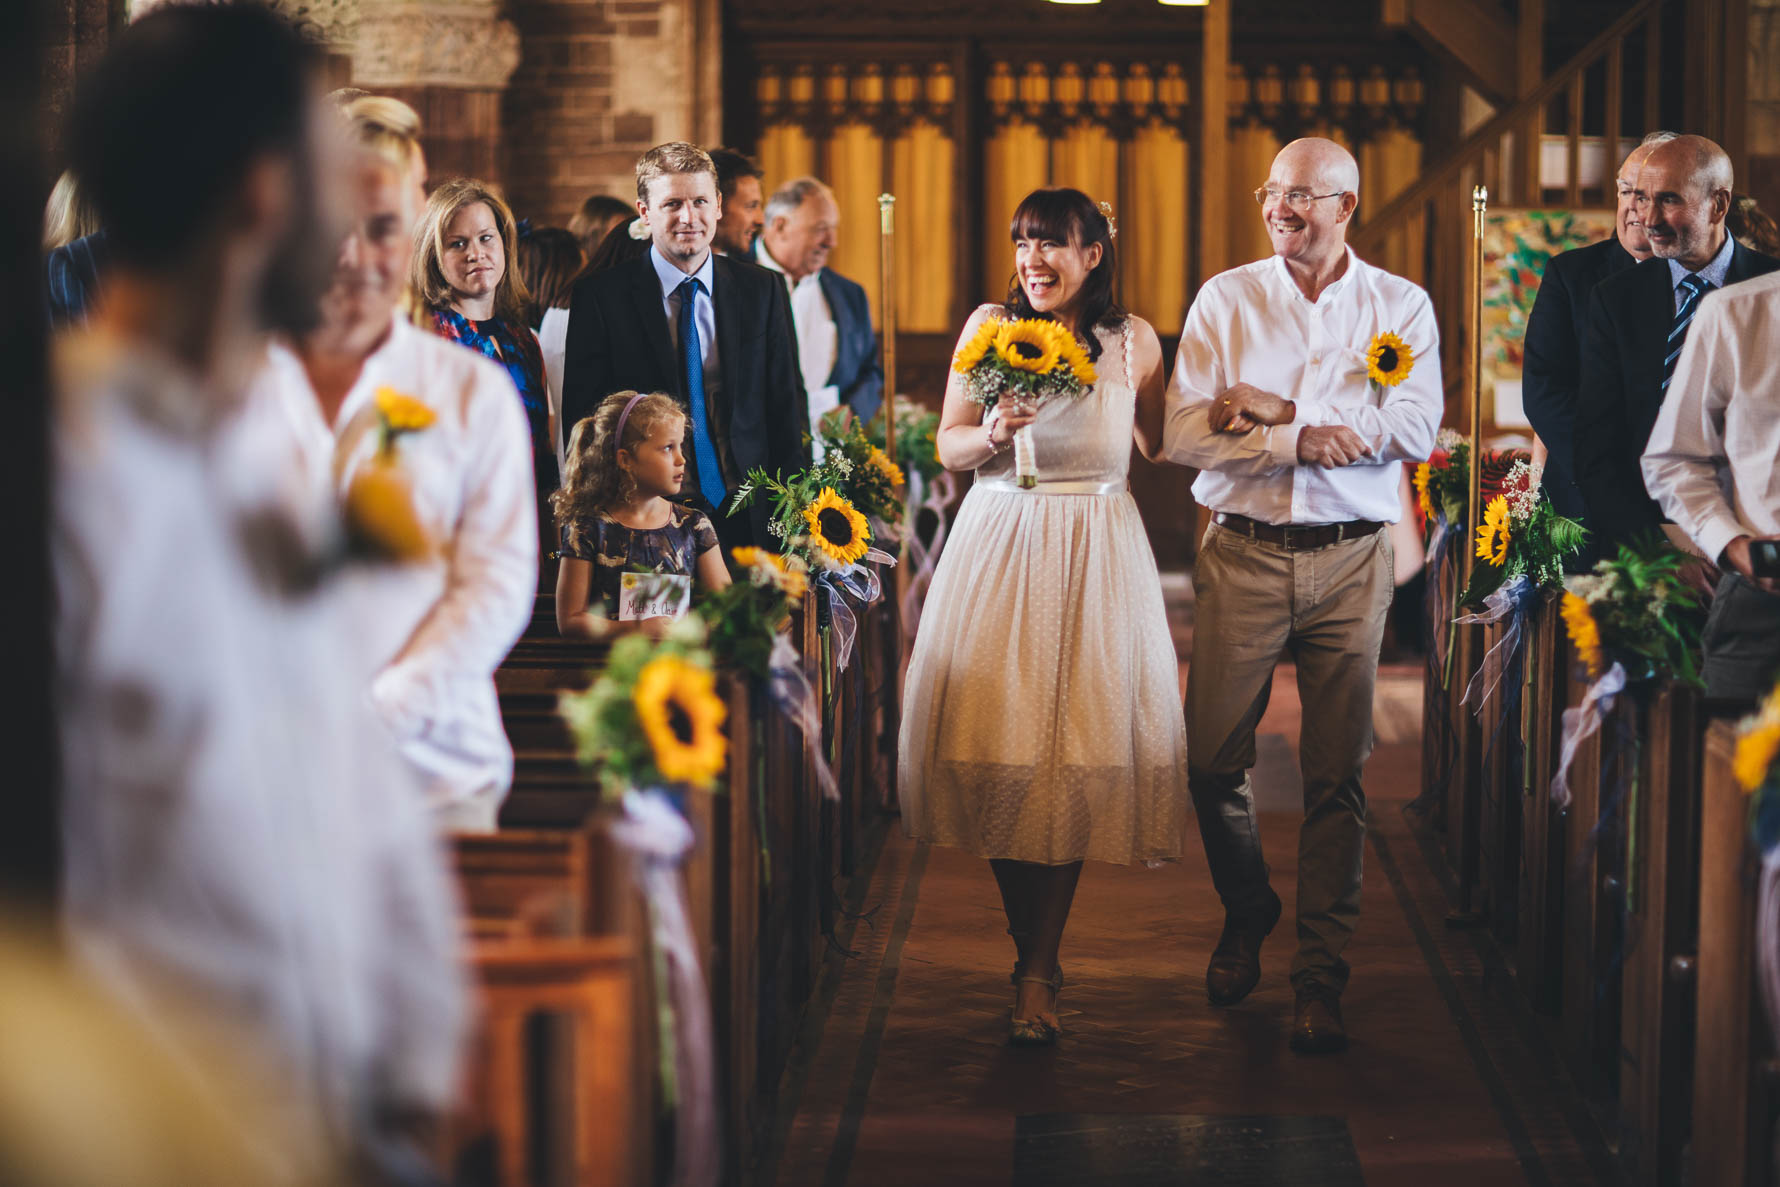 Bride and her father walking down the aisle in a church in Devon. The bride is holding a bouquet of sunflowwers and there are sunflowers on the end of each church pew